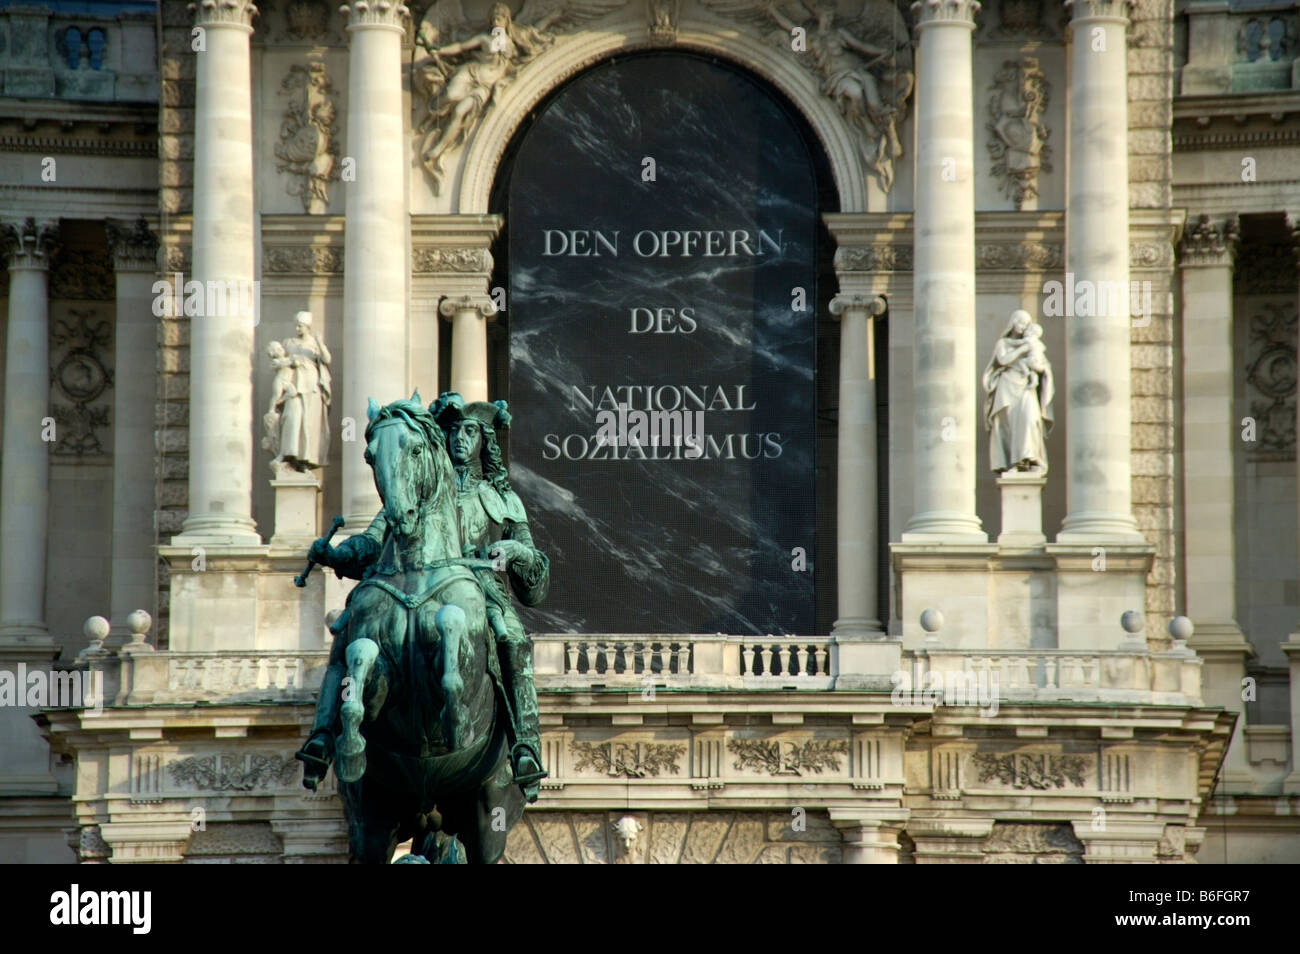 Hofburg with an equestrian statue and the inscription Den Opfern des Nationalsozialismus, To the Victims of National Socialism, Stock Photo